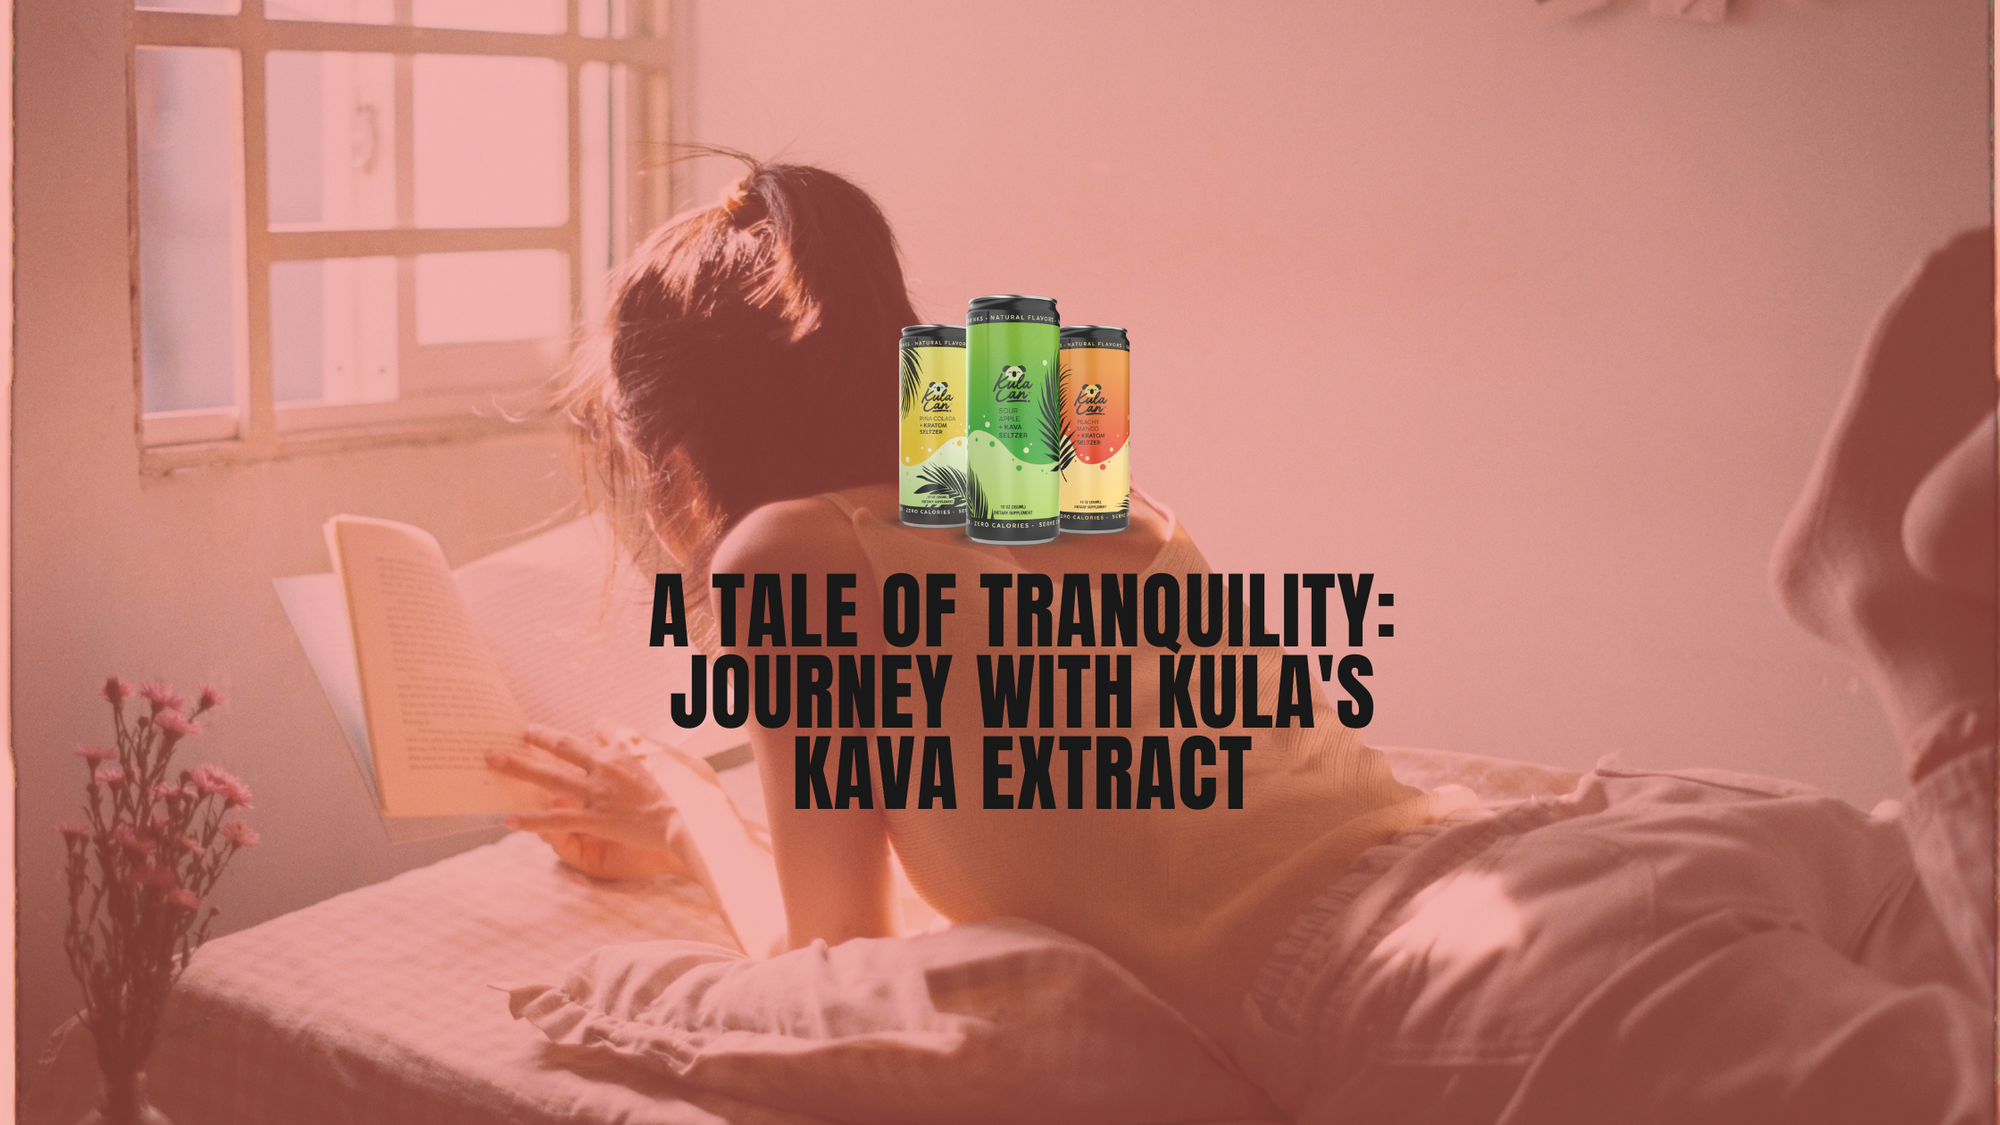 A Tale of Tranquility: Journeying with Kula's Kava Extract